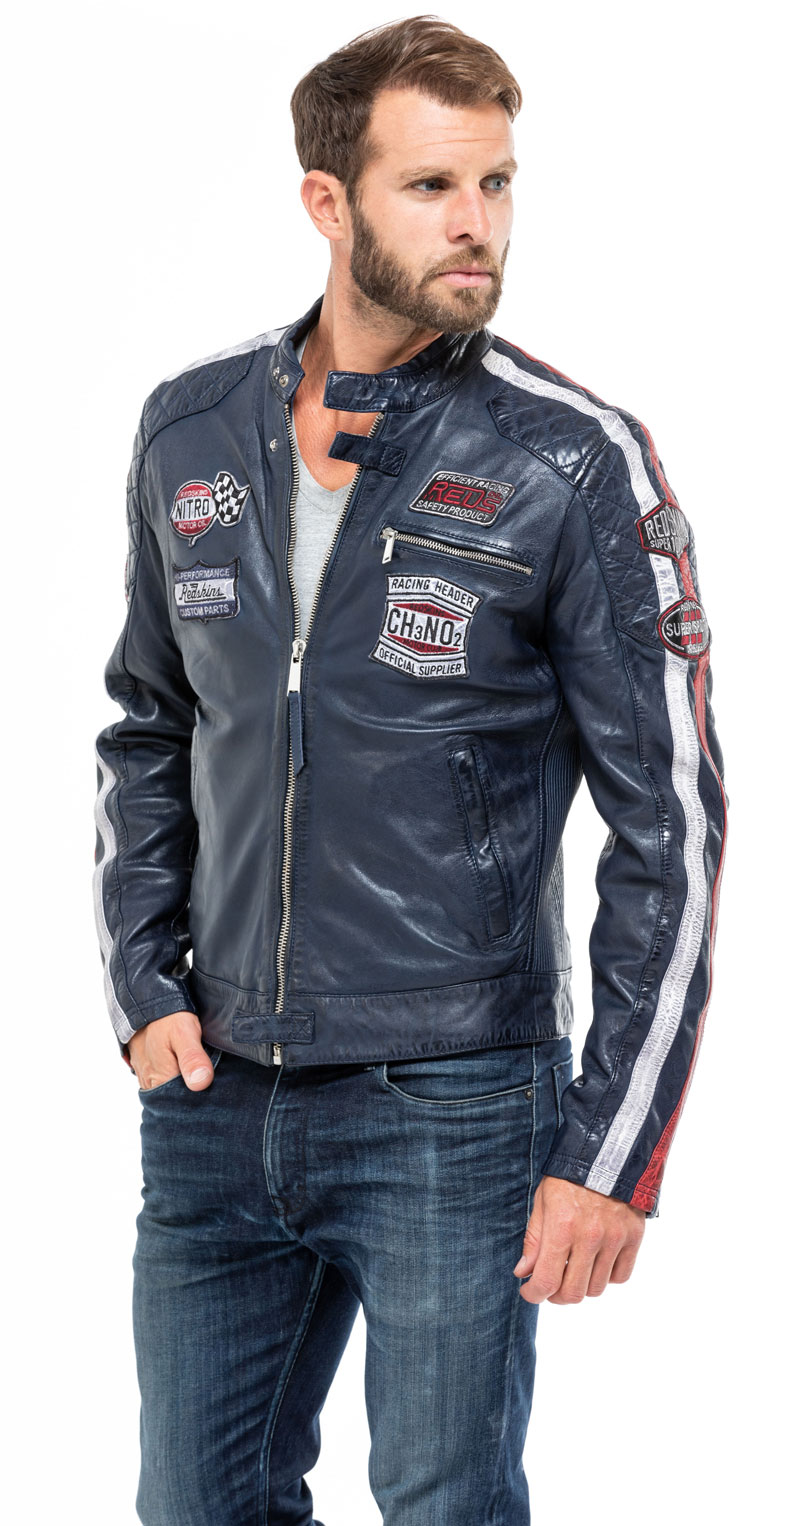 Leather Zipped Jackets Redskins Men Leather Zipped Jacket REDSKINS 48 Men Clothing Redskins Men Coats & Jackets Redskins Men Leathers Redskins Men Leather Zipped Jackets Redskins Men M black 